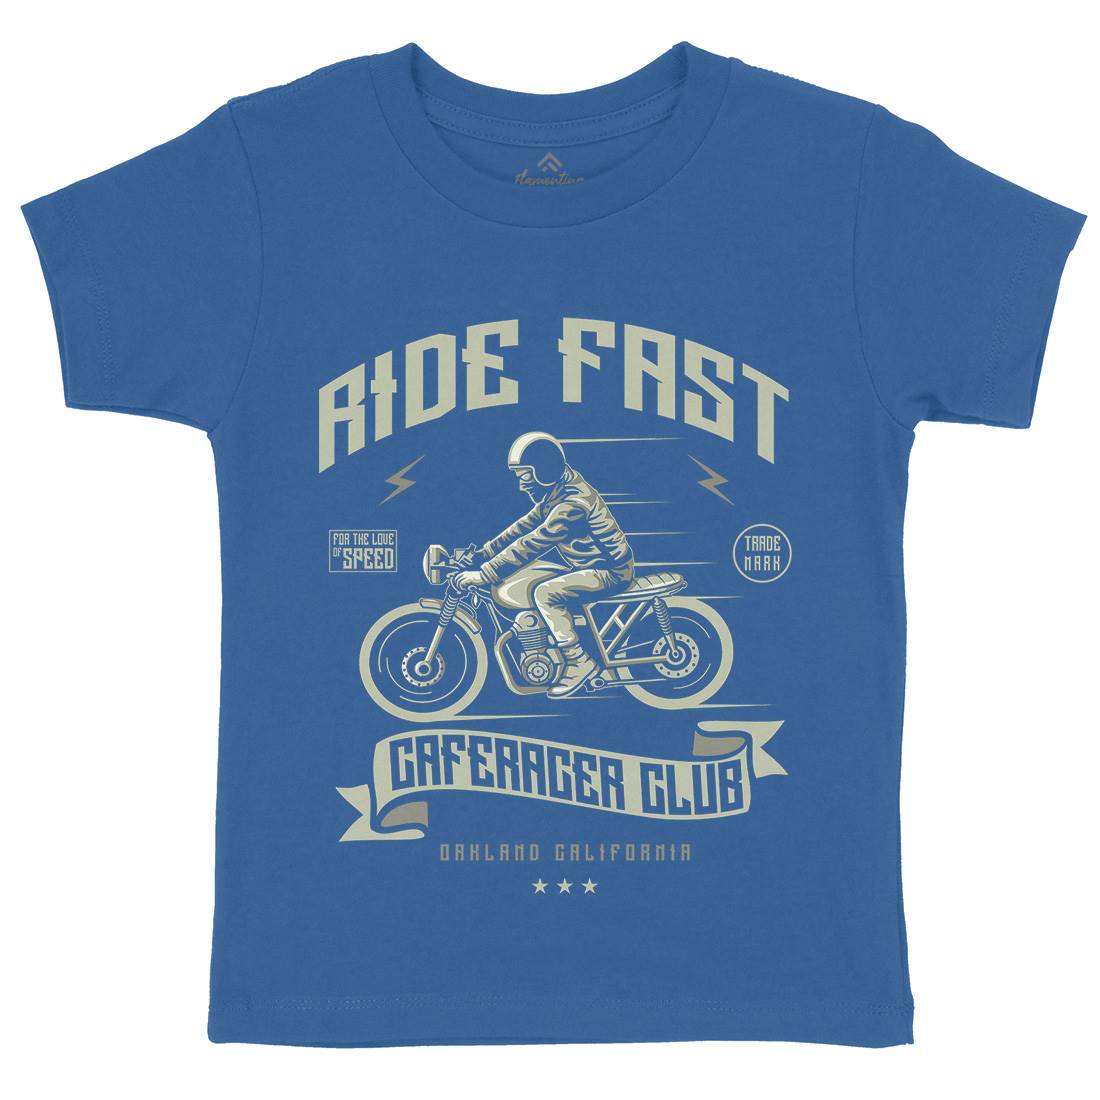 Ride Fast Kids Organic Crew Neck T-Shirt Motorcycles A117